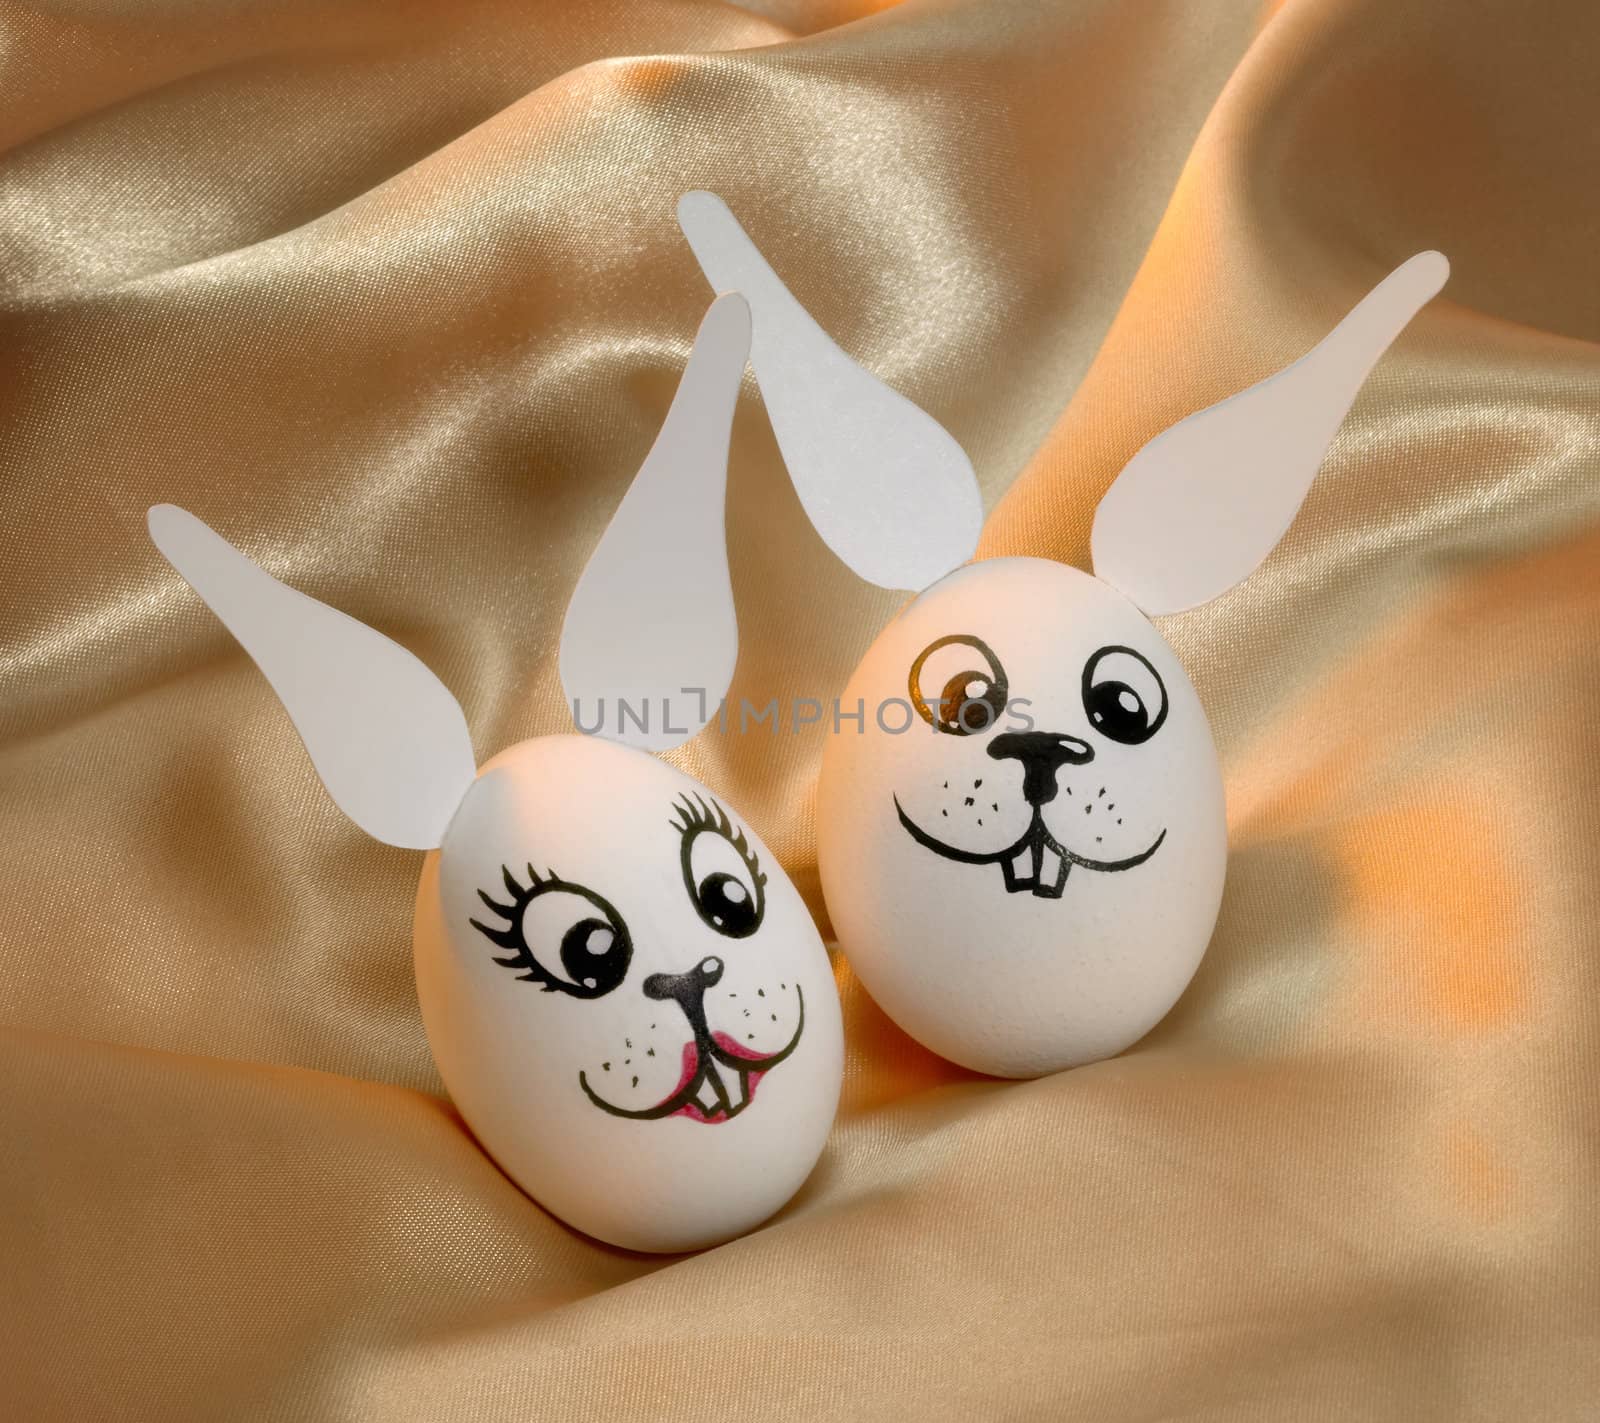 bunny easter eggs by gewoldi